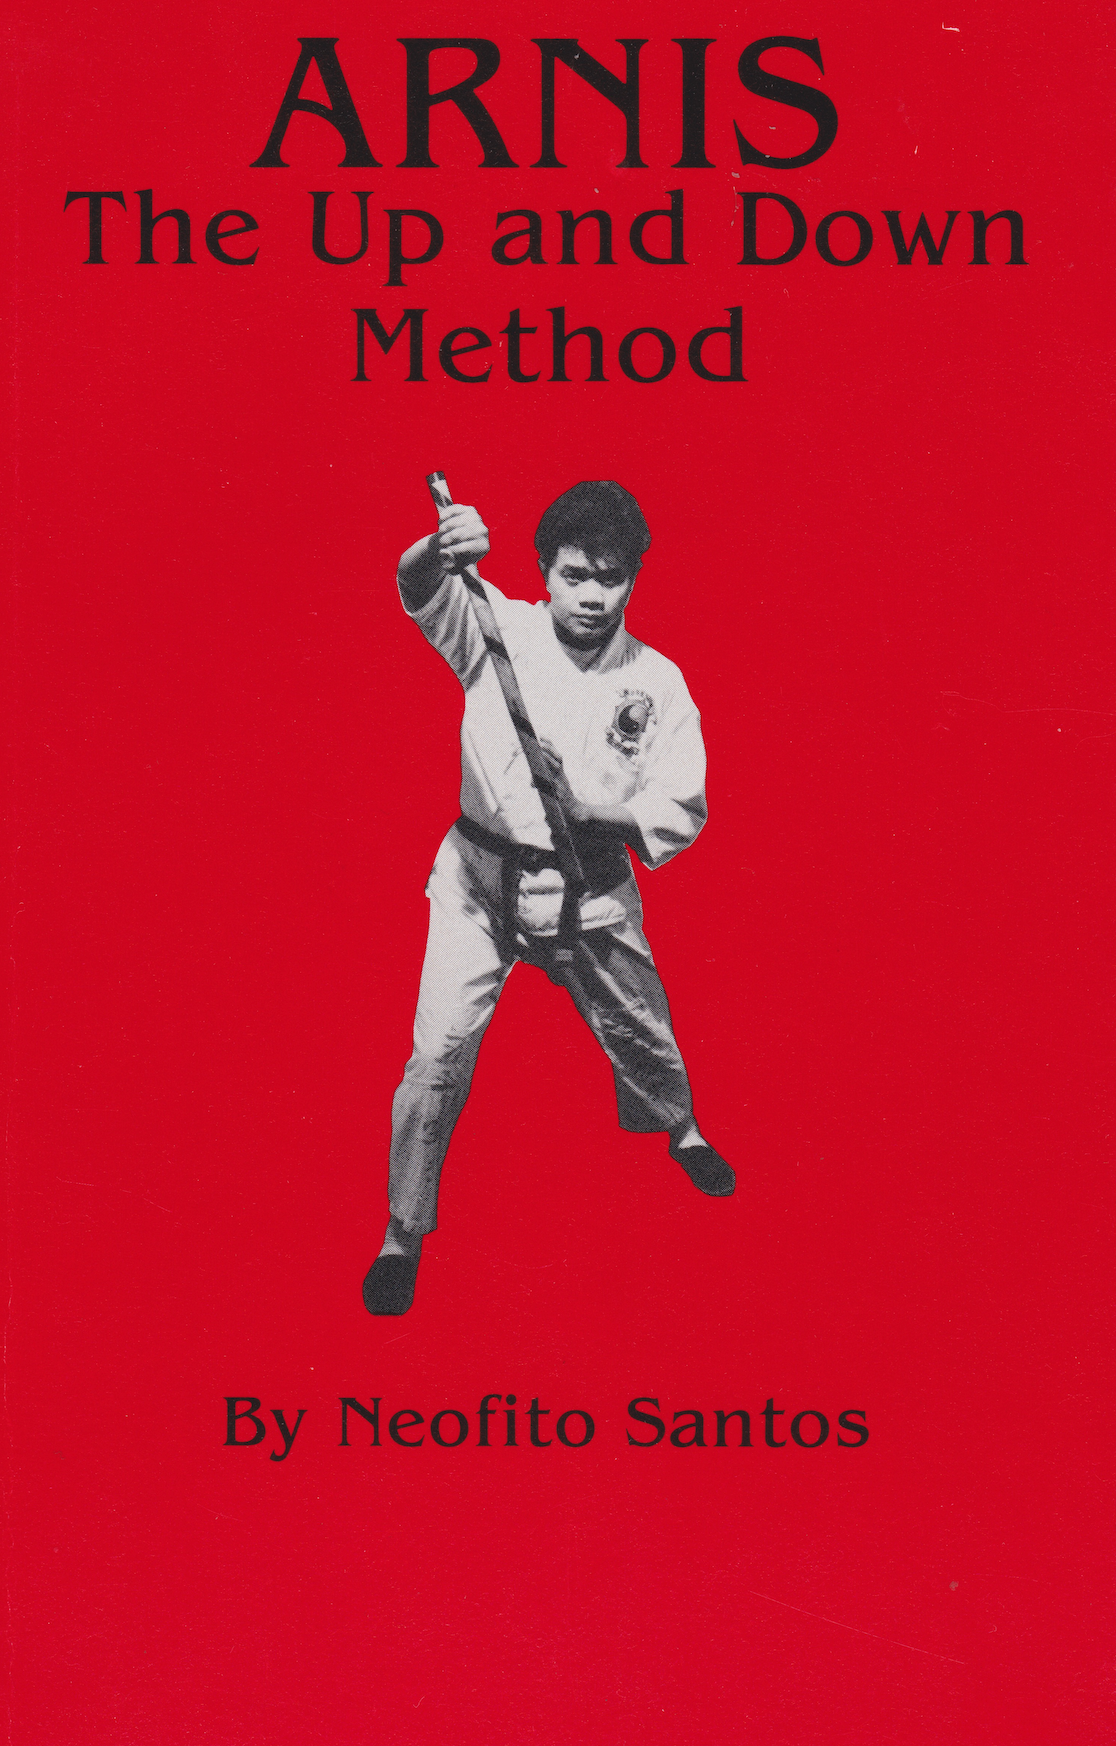 Arnis The Up and Down Method Book ネオフィト・サントス著